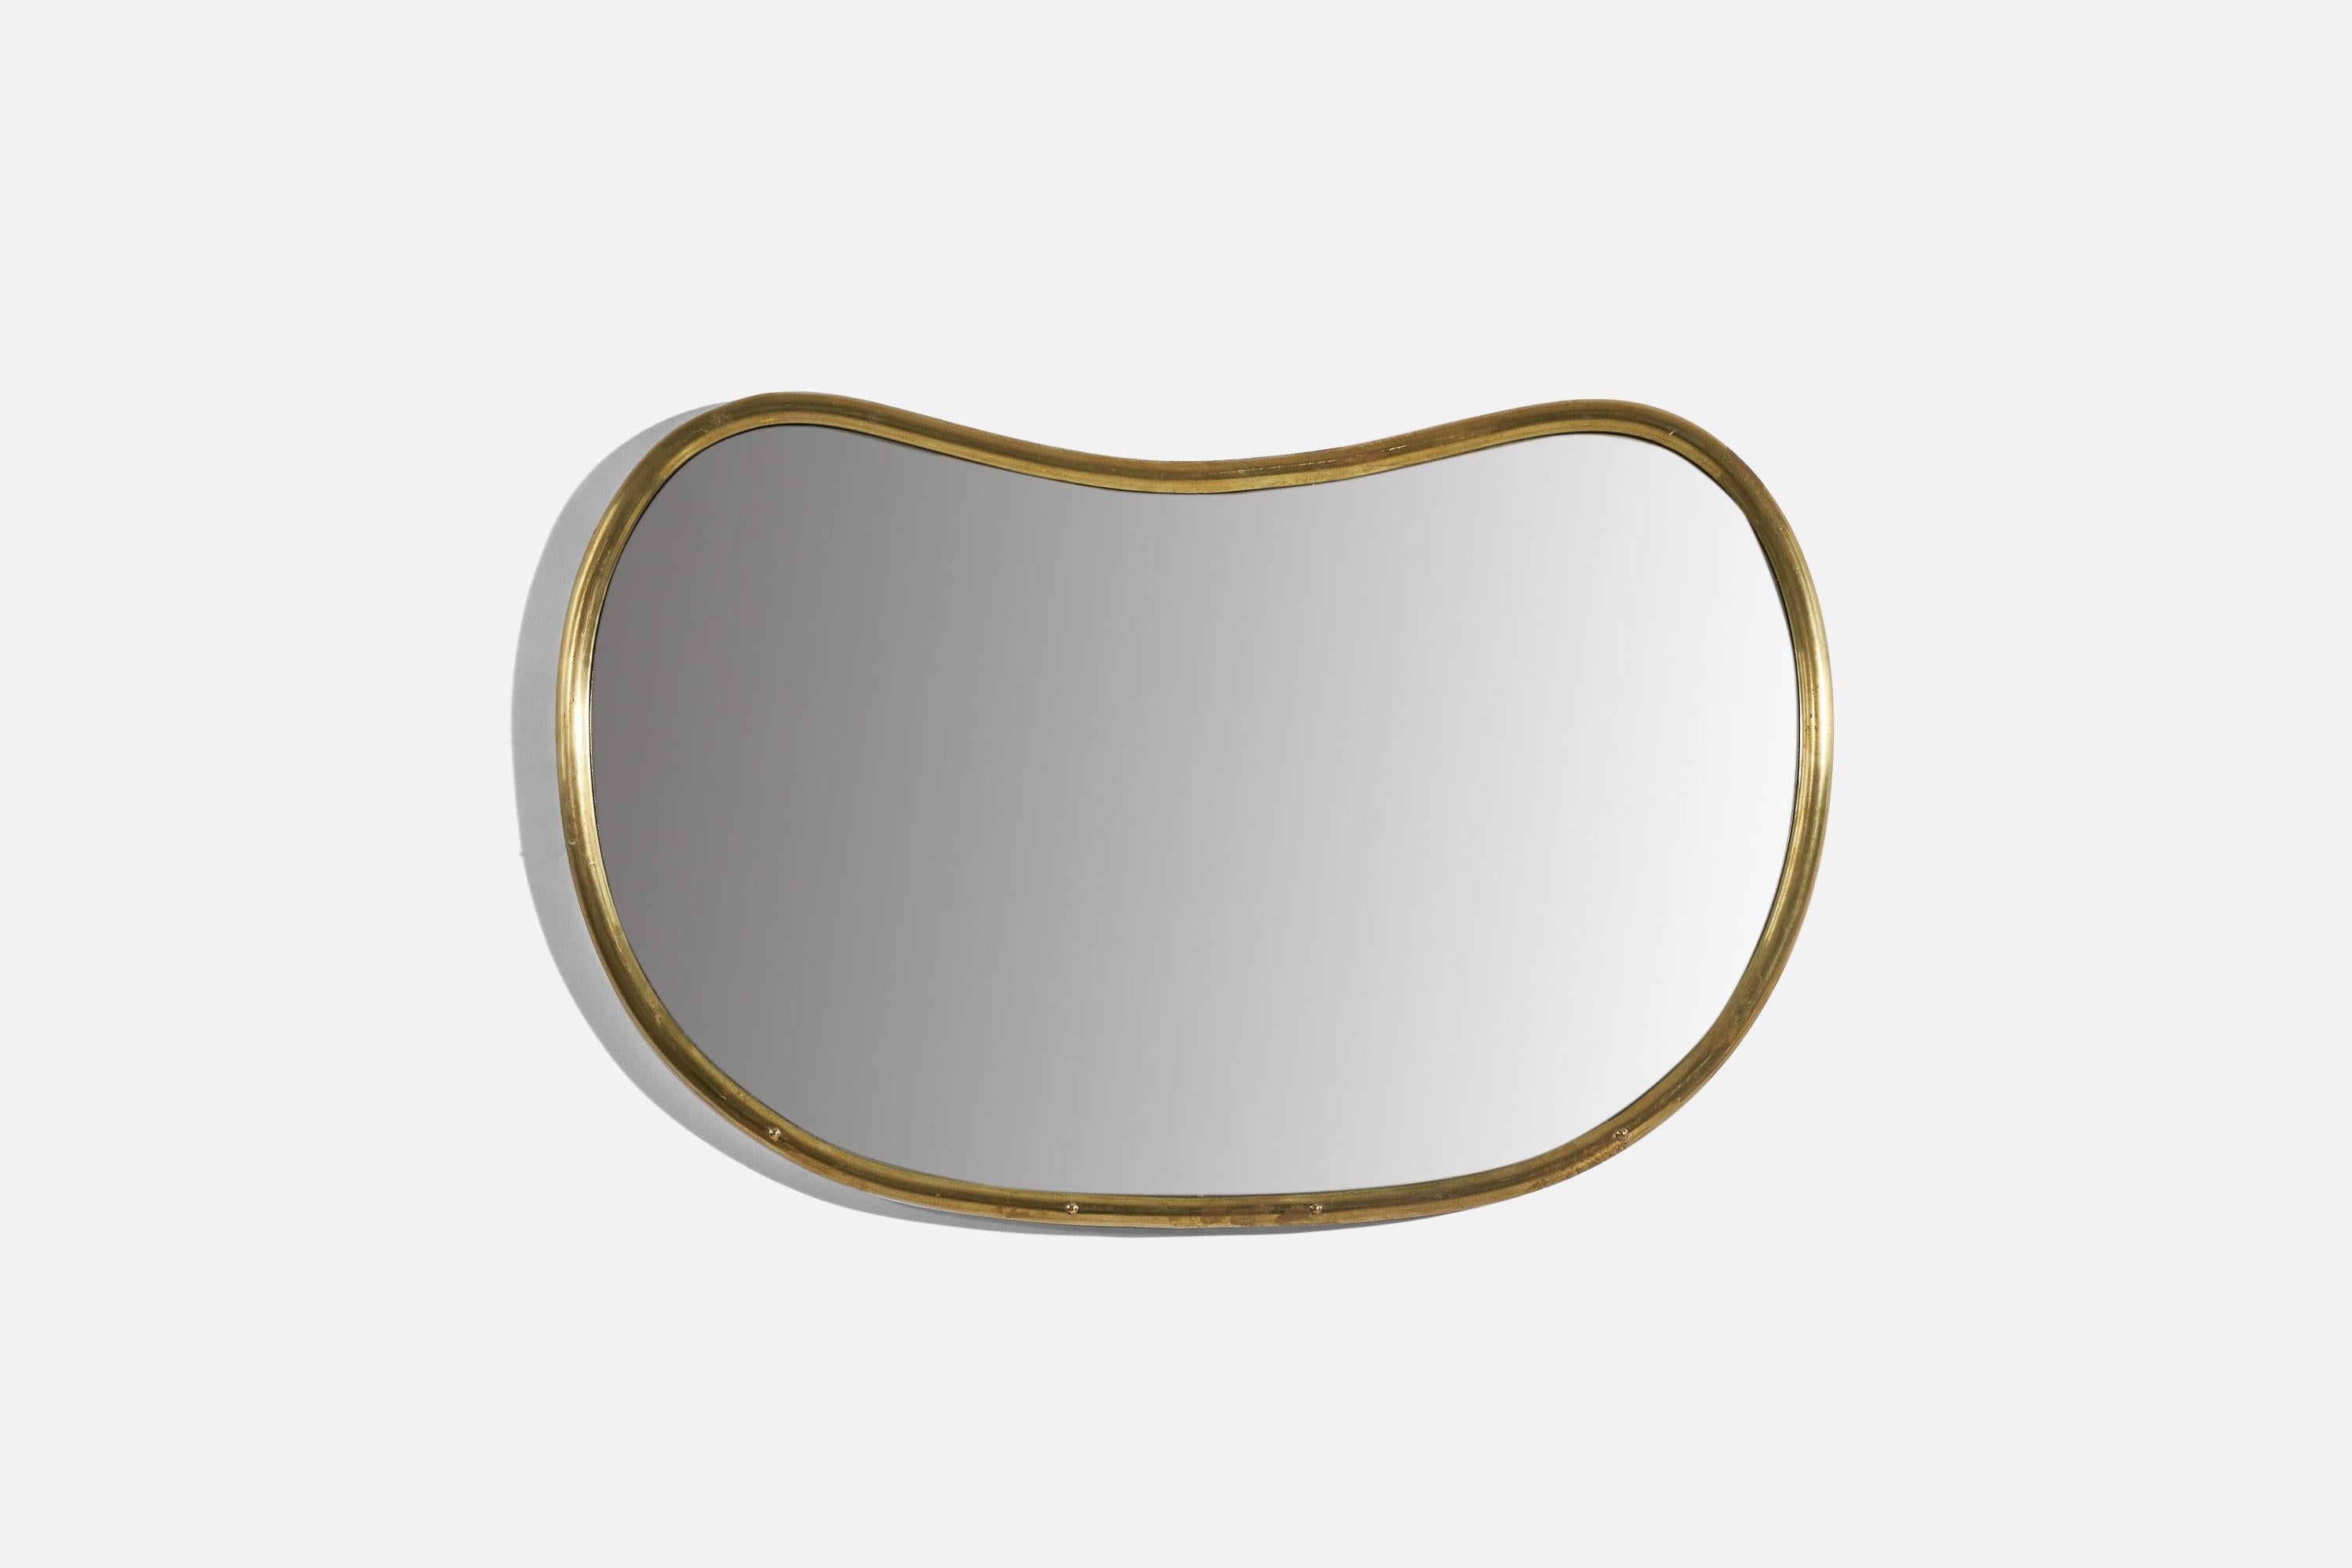 A brass wall mirror designed and produced in Italy, c. 1940s.
   